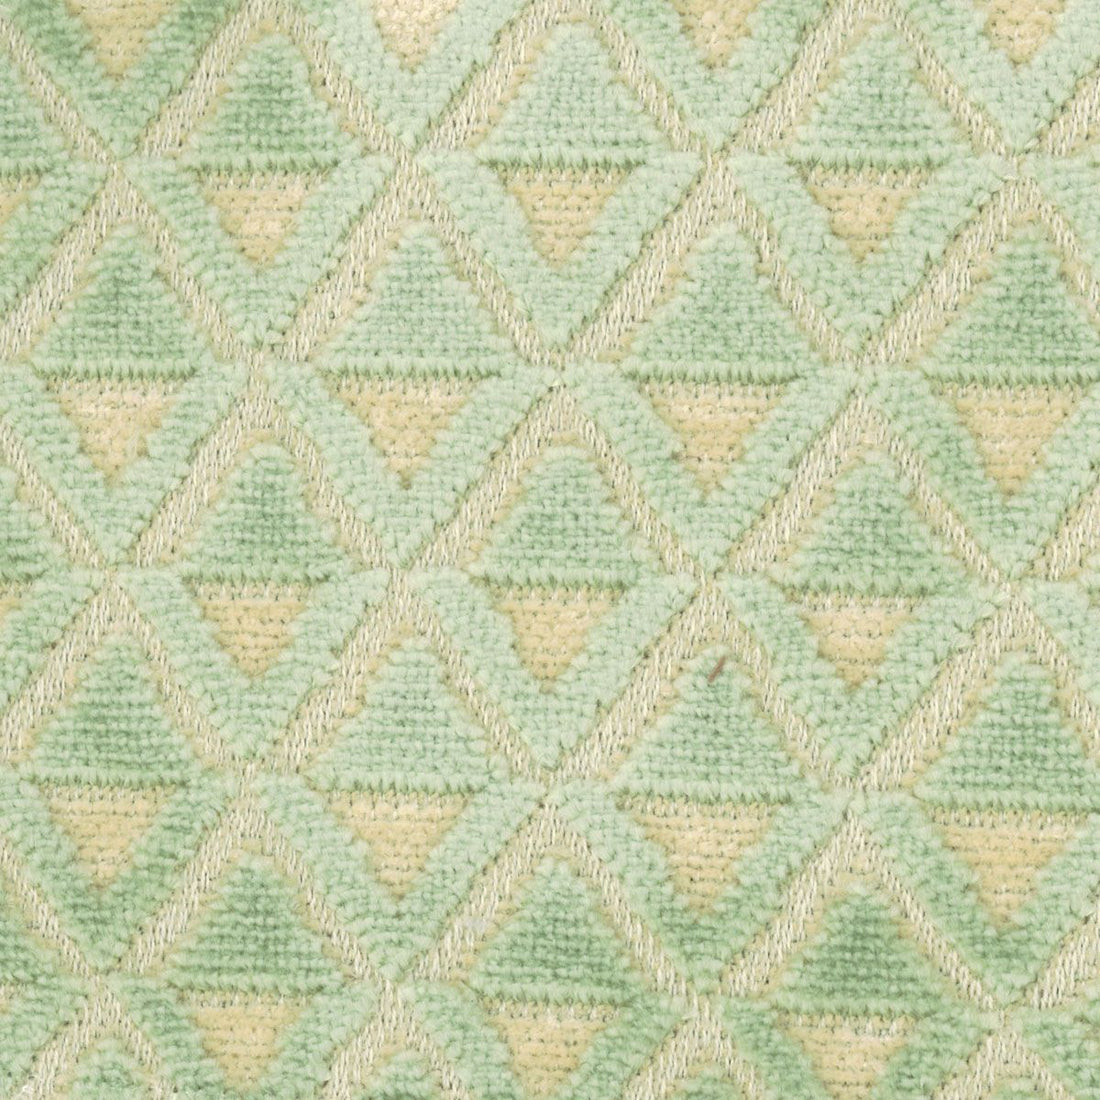 Sensi fabric in mint color - pattern number VV 00336249 - by Scalamandre in the Old World Weavers collection